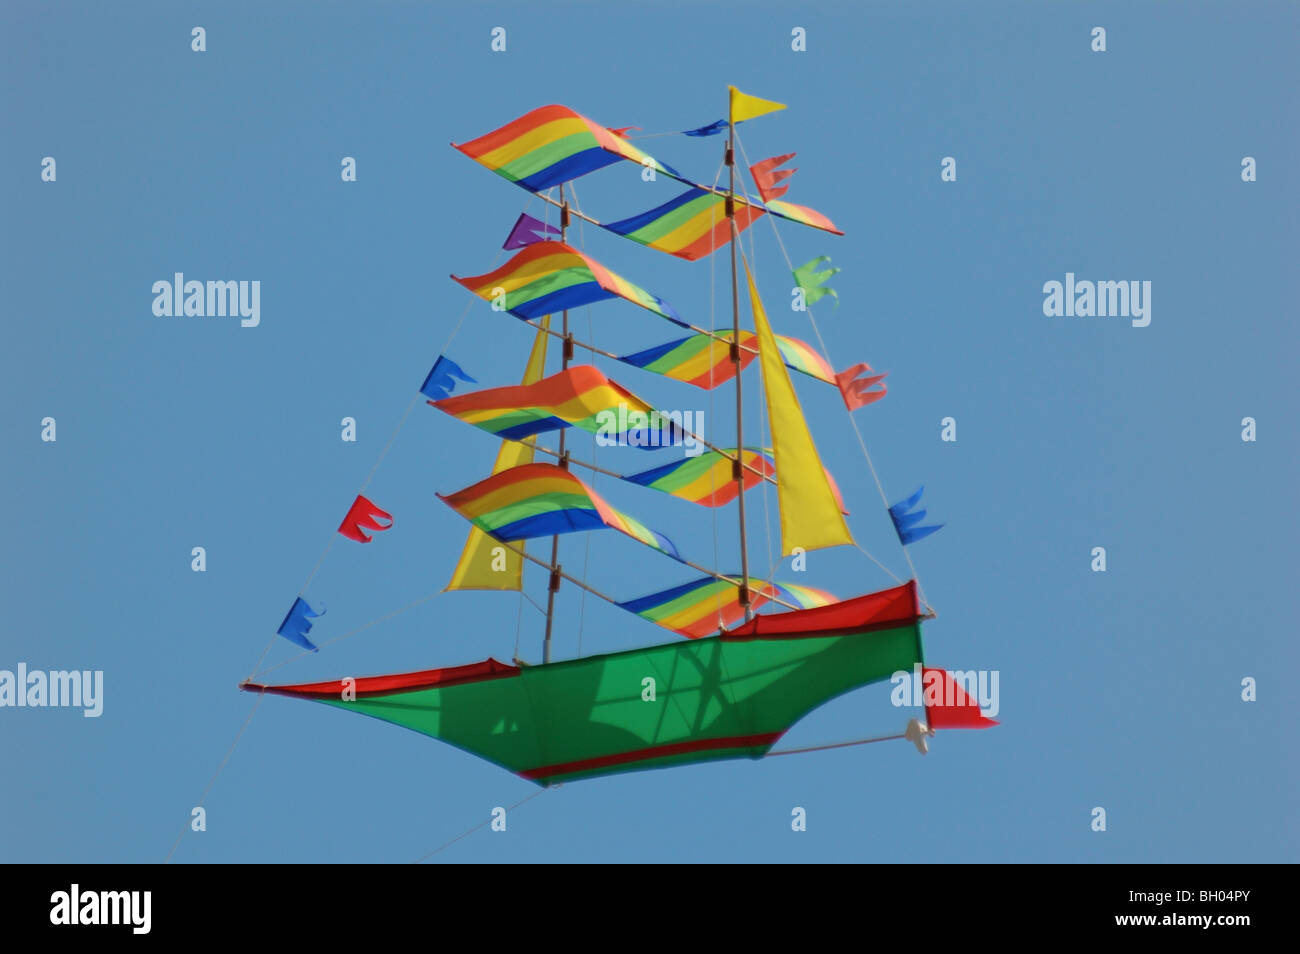 Kite in the shape of a sailing ship in Bali, Indonesia Stock Photo - Alamy